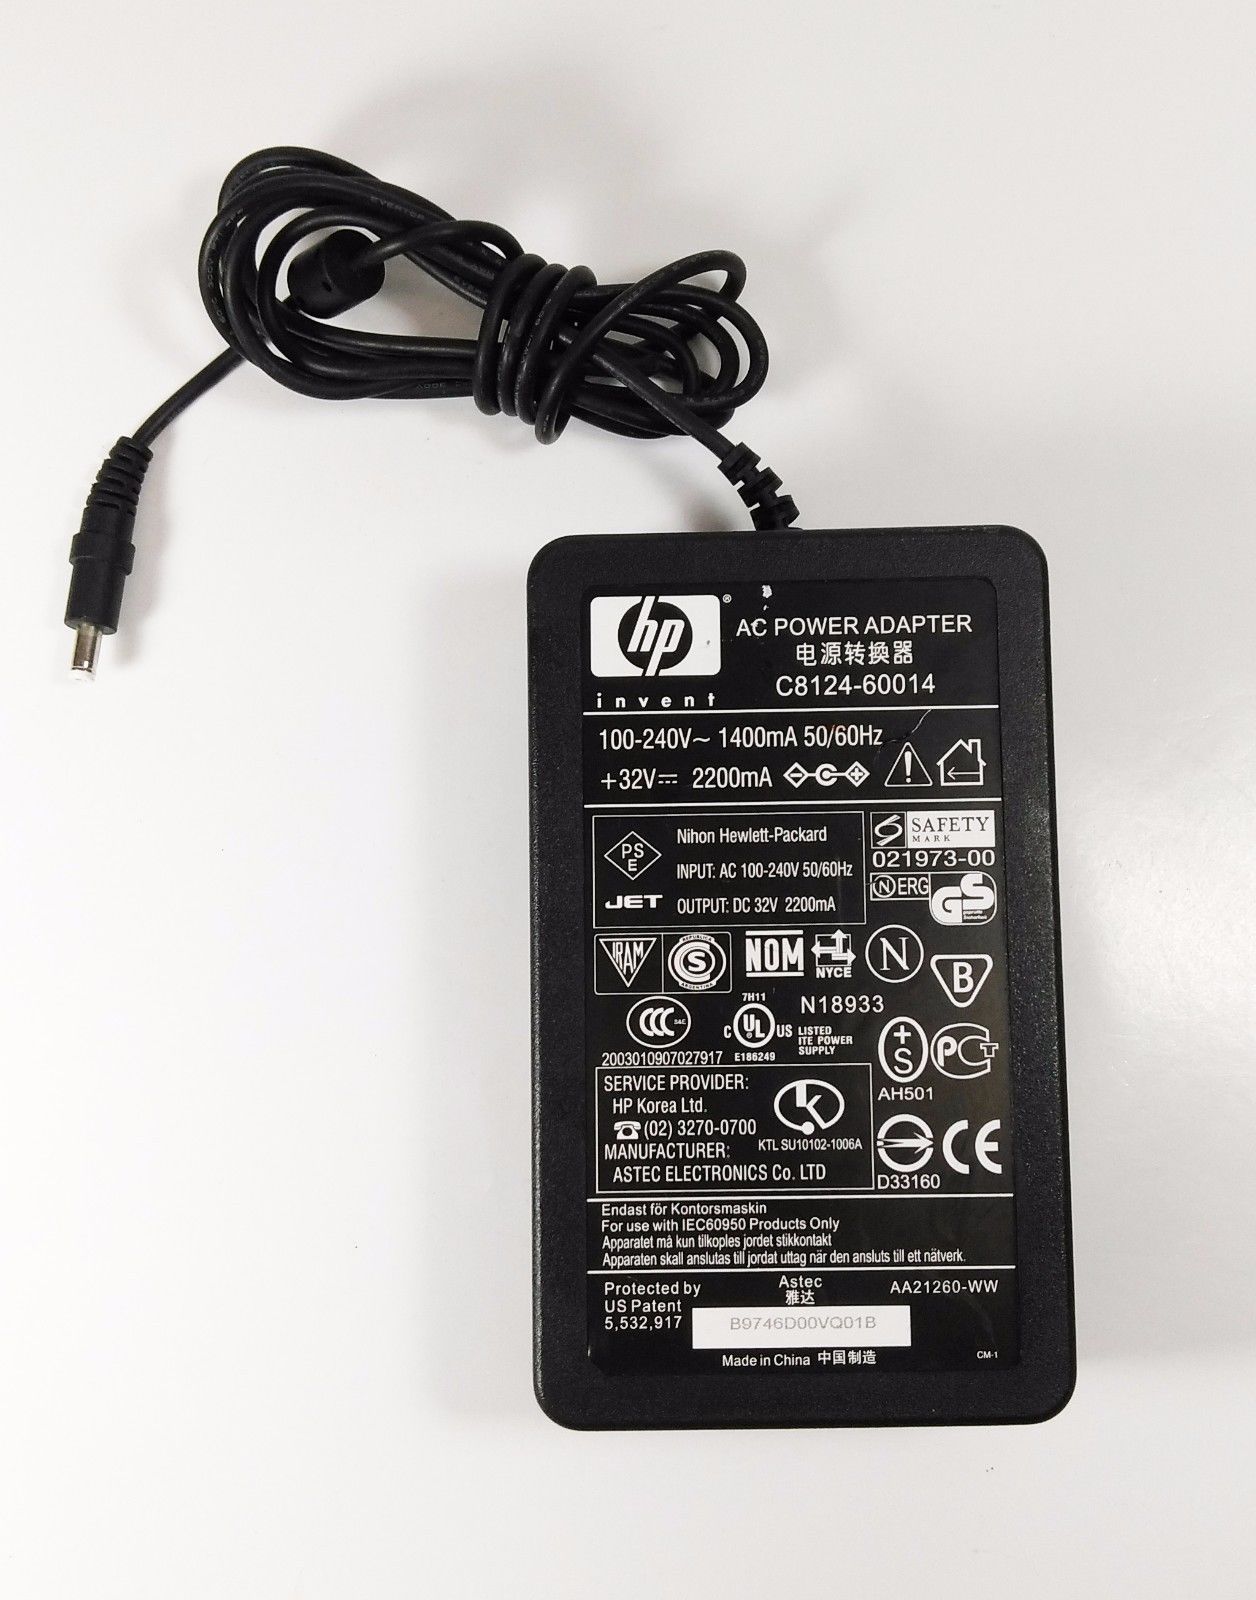 32V 2200mA 70W HP DeskJet C9005A Printer AC Power Adapter Charger